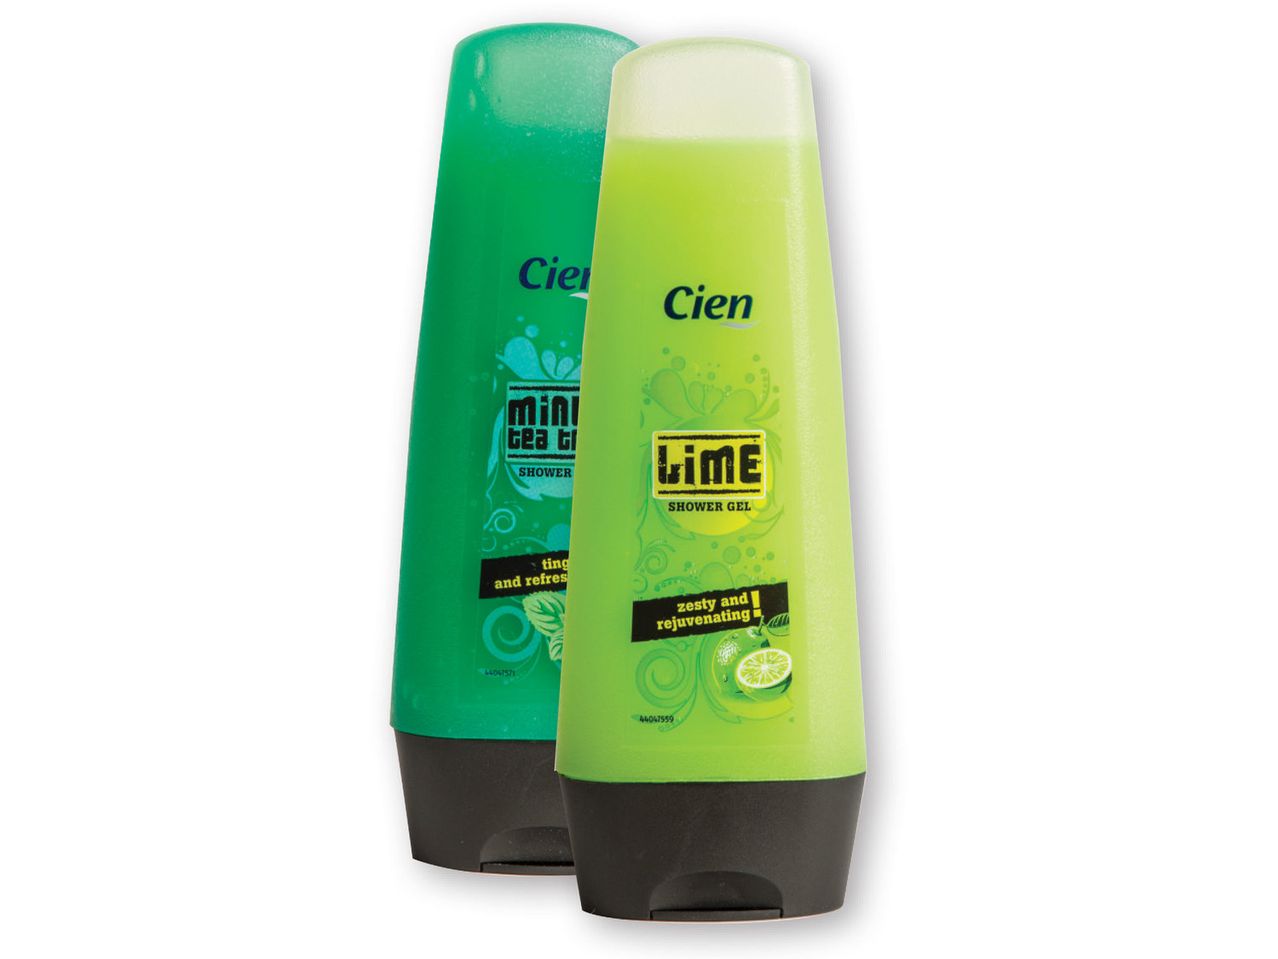 Go to full screen view: CIEN Shower Gels - Image 1